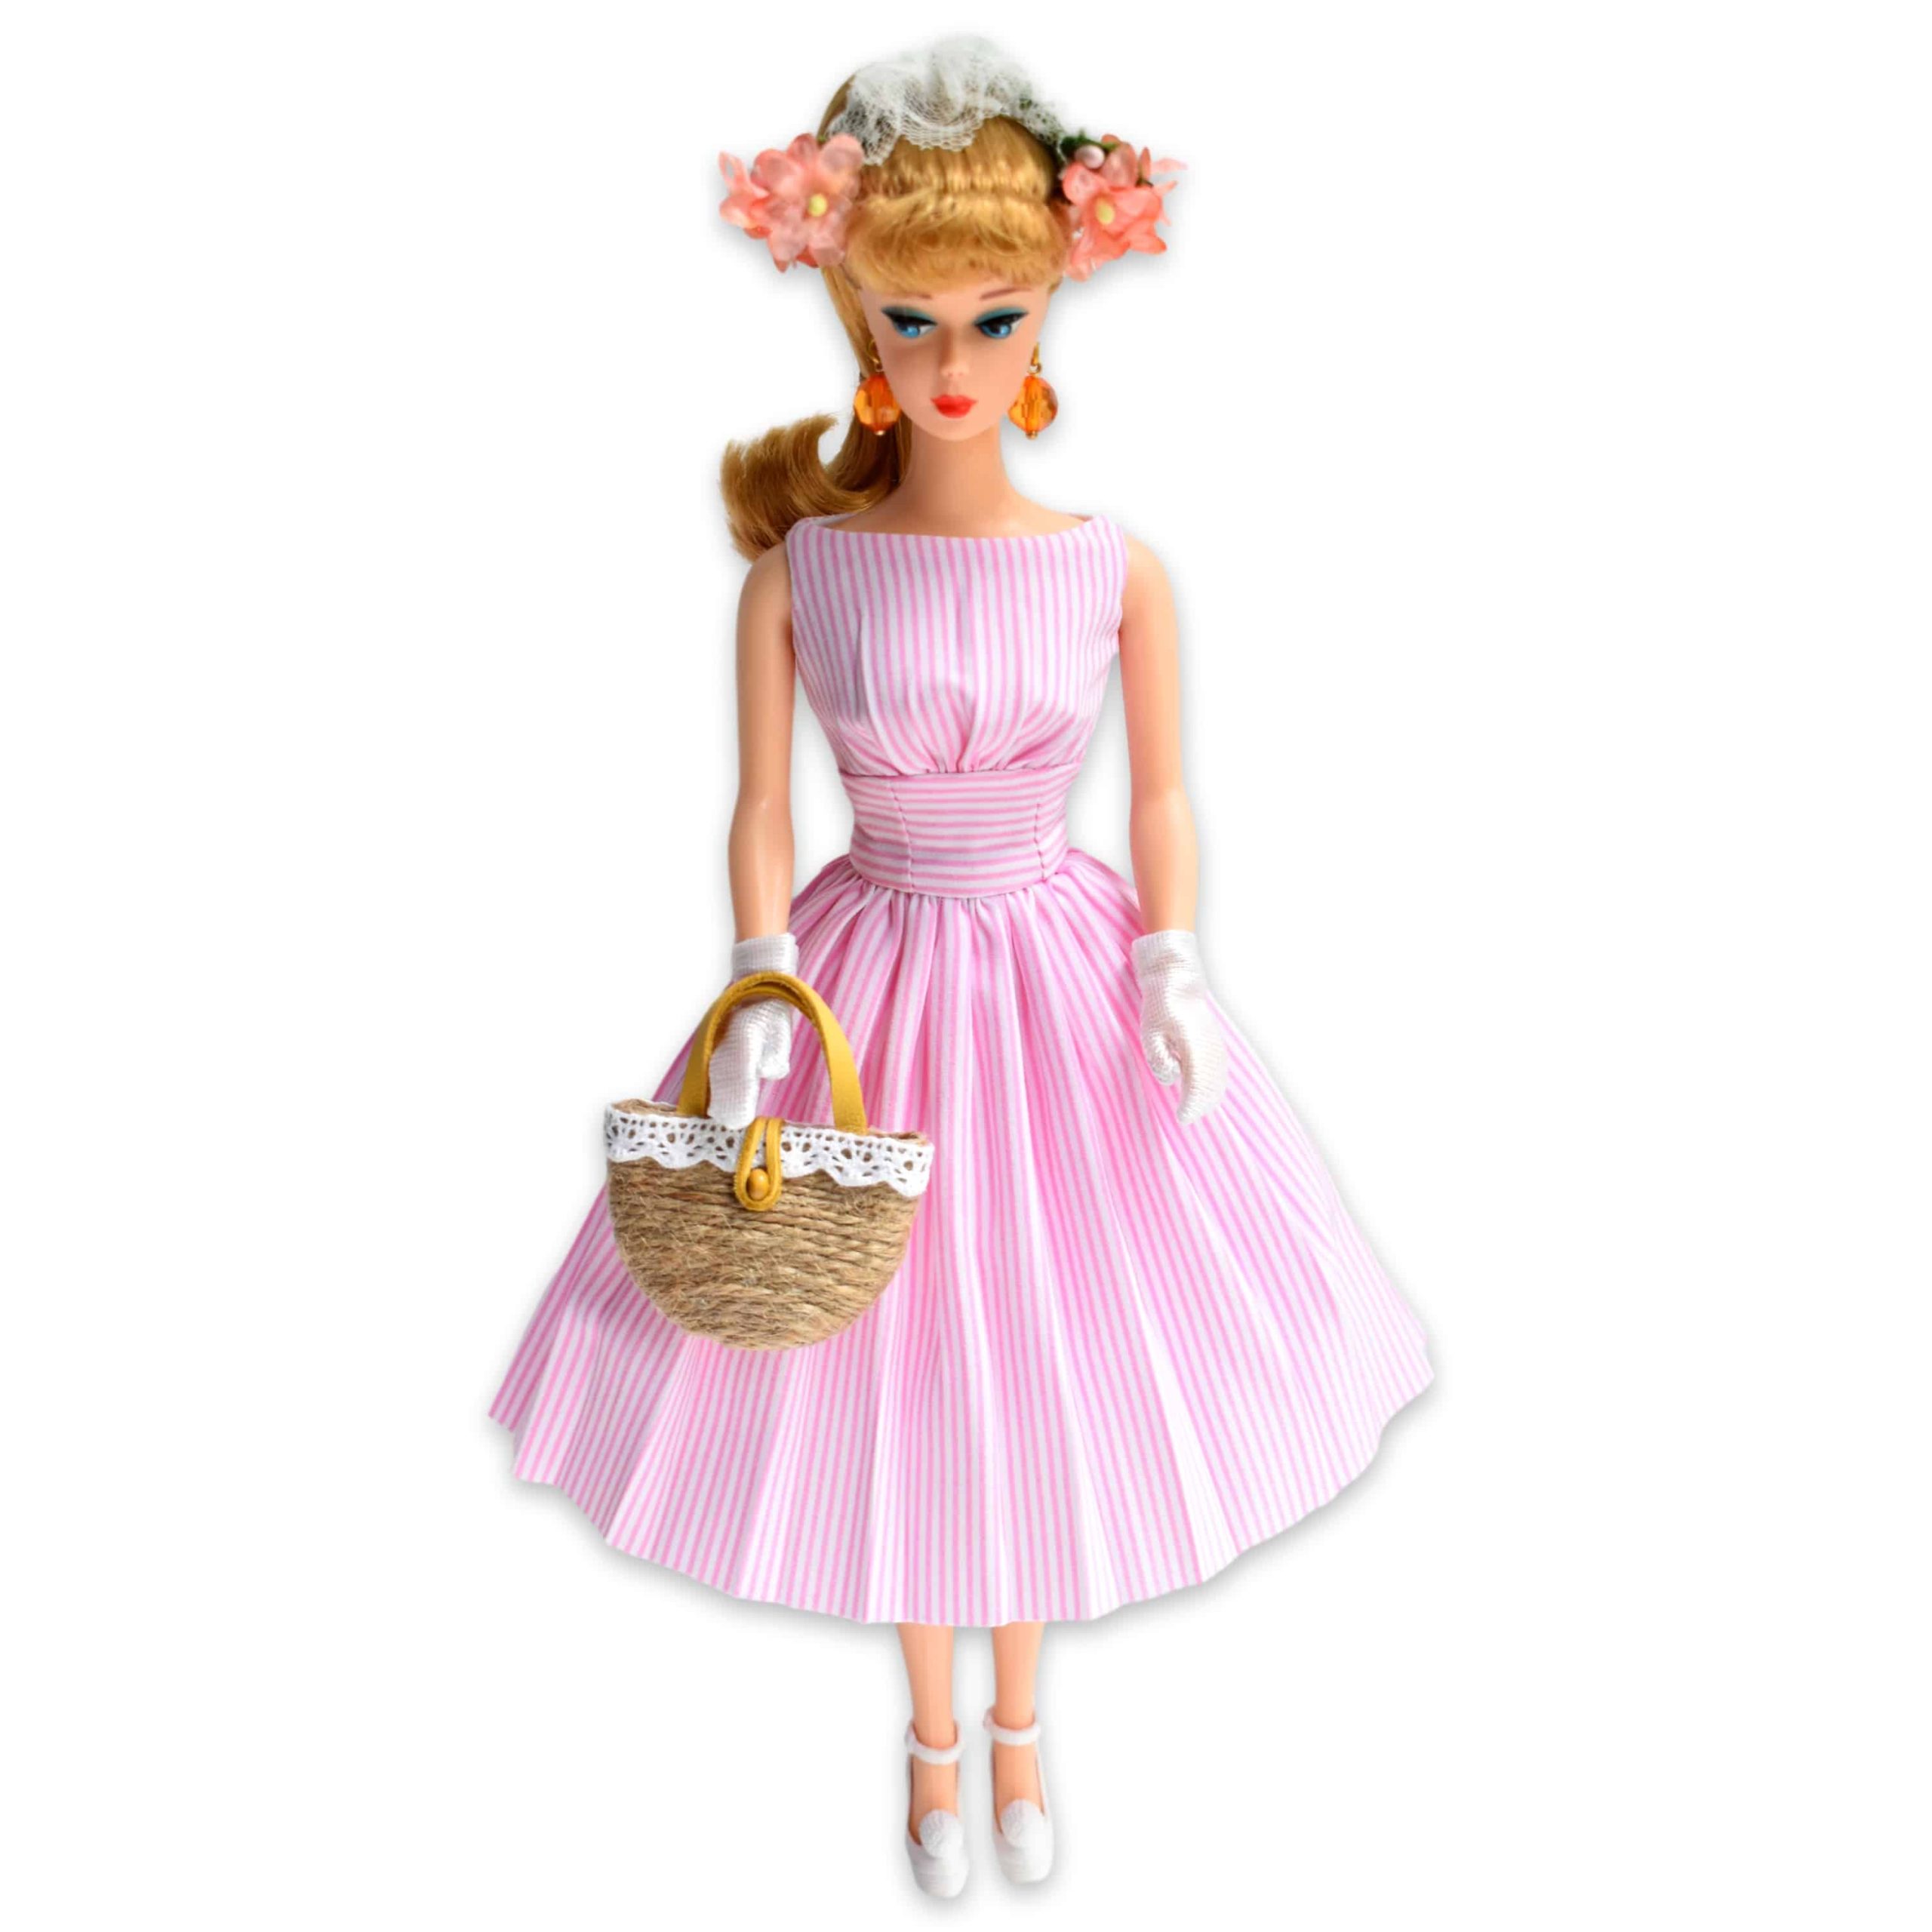 Vintage Barbie Dolls All You Need to Know